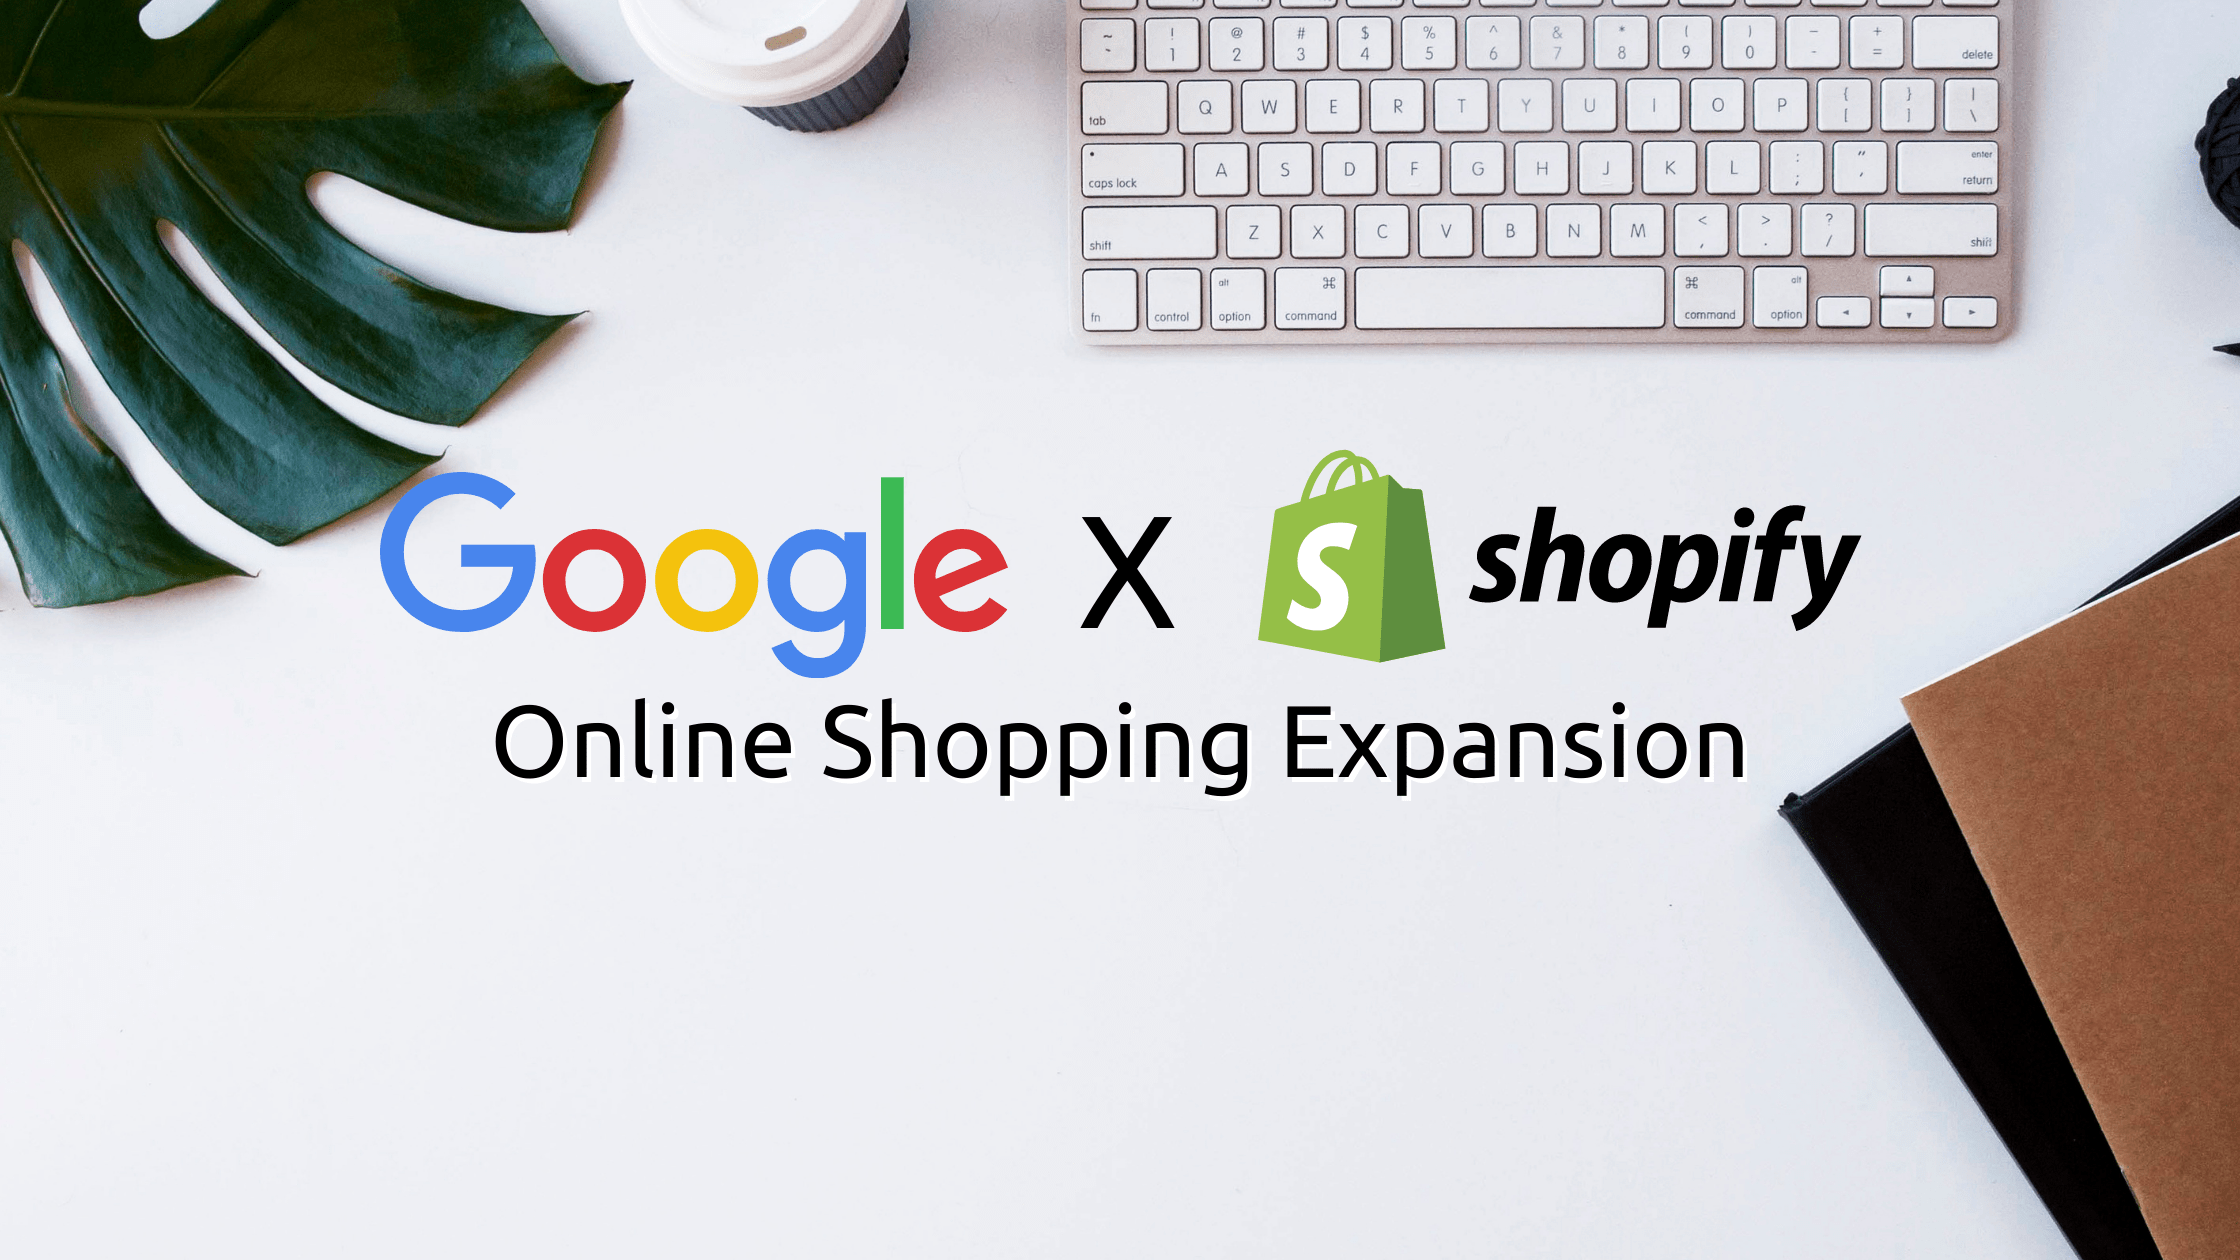 Google Partners with Shopify for Online Shopping Expansion